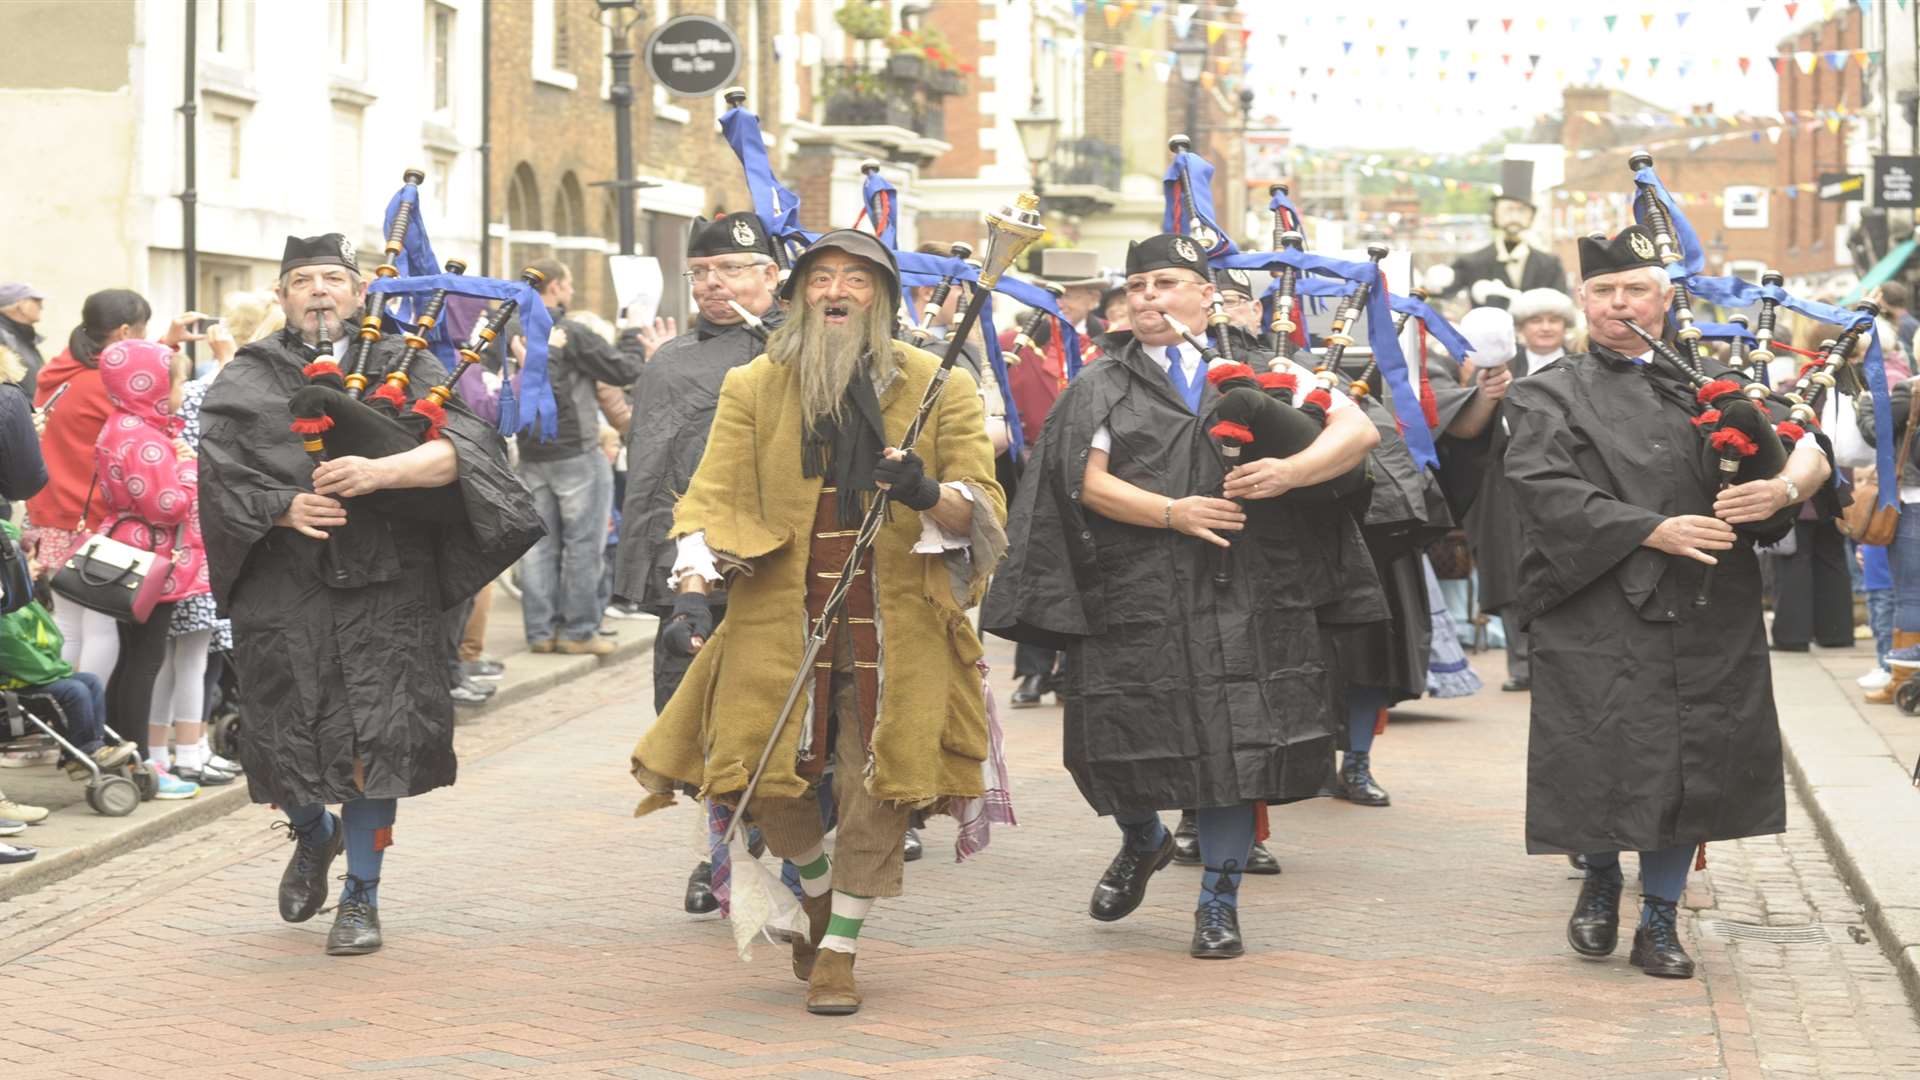 Dickens festival parade in Rochester High Street